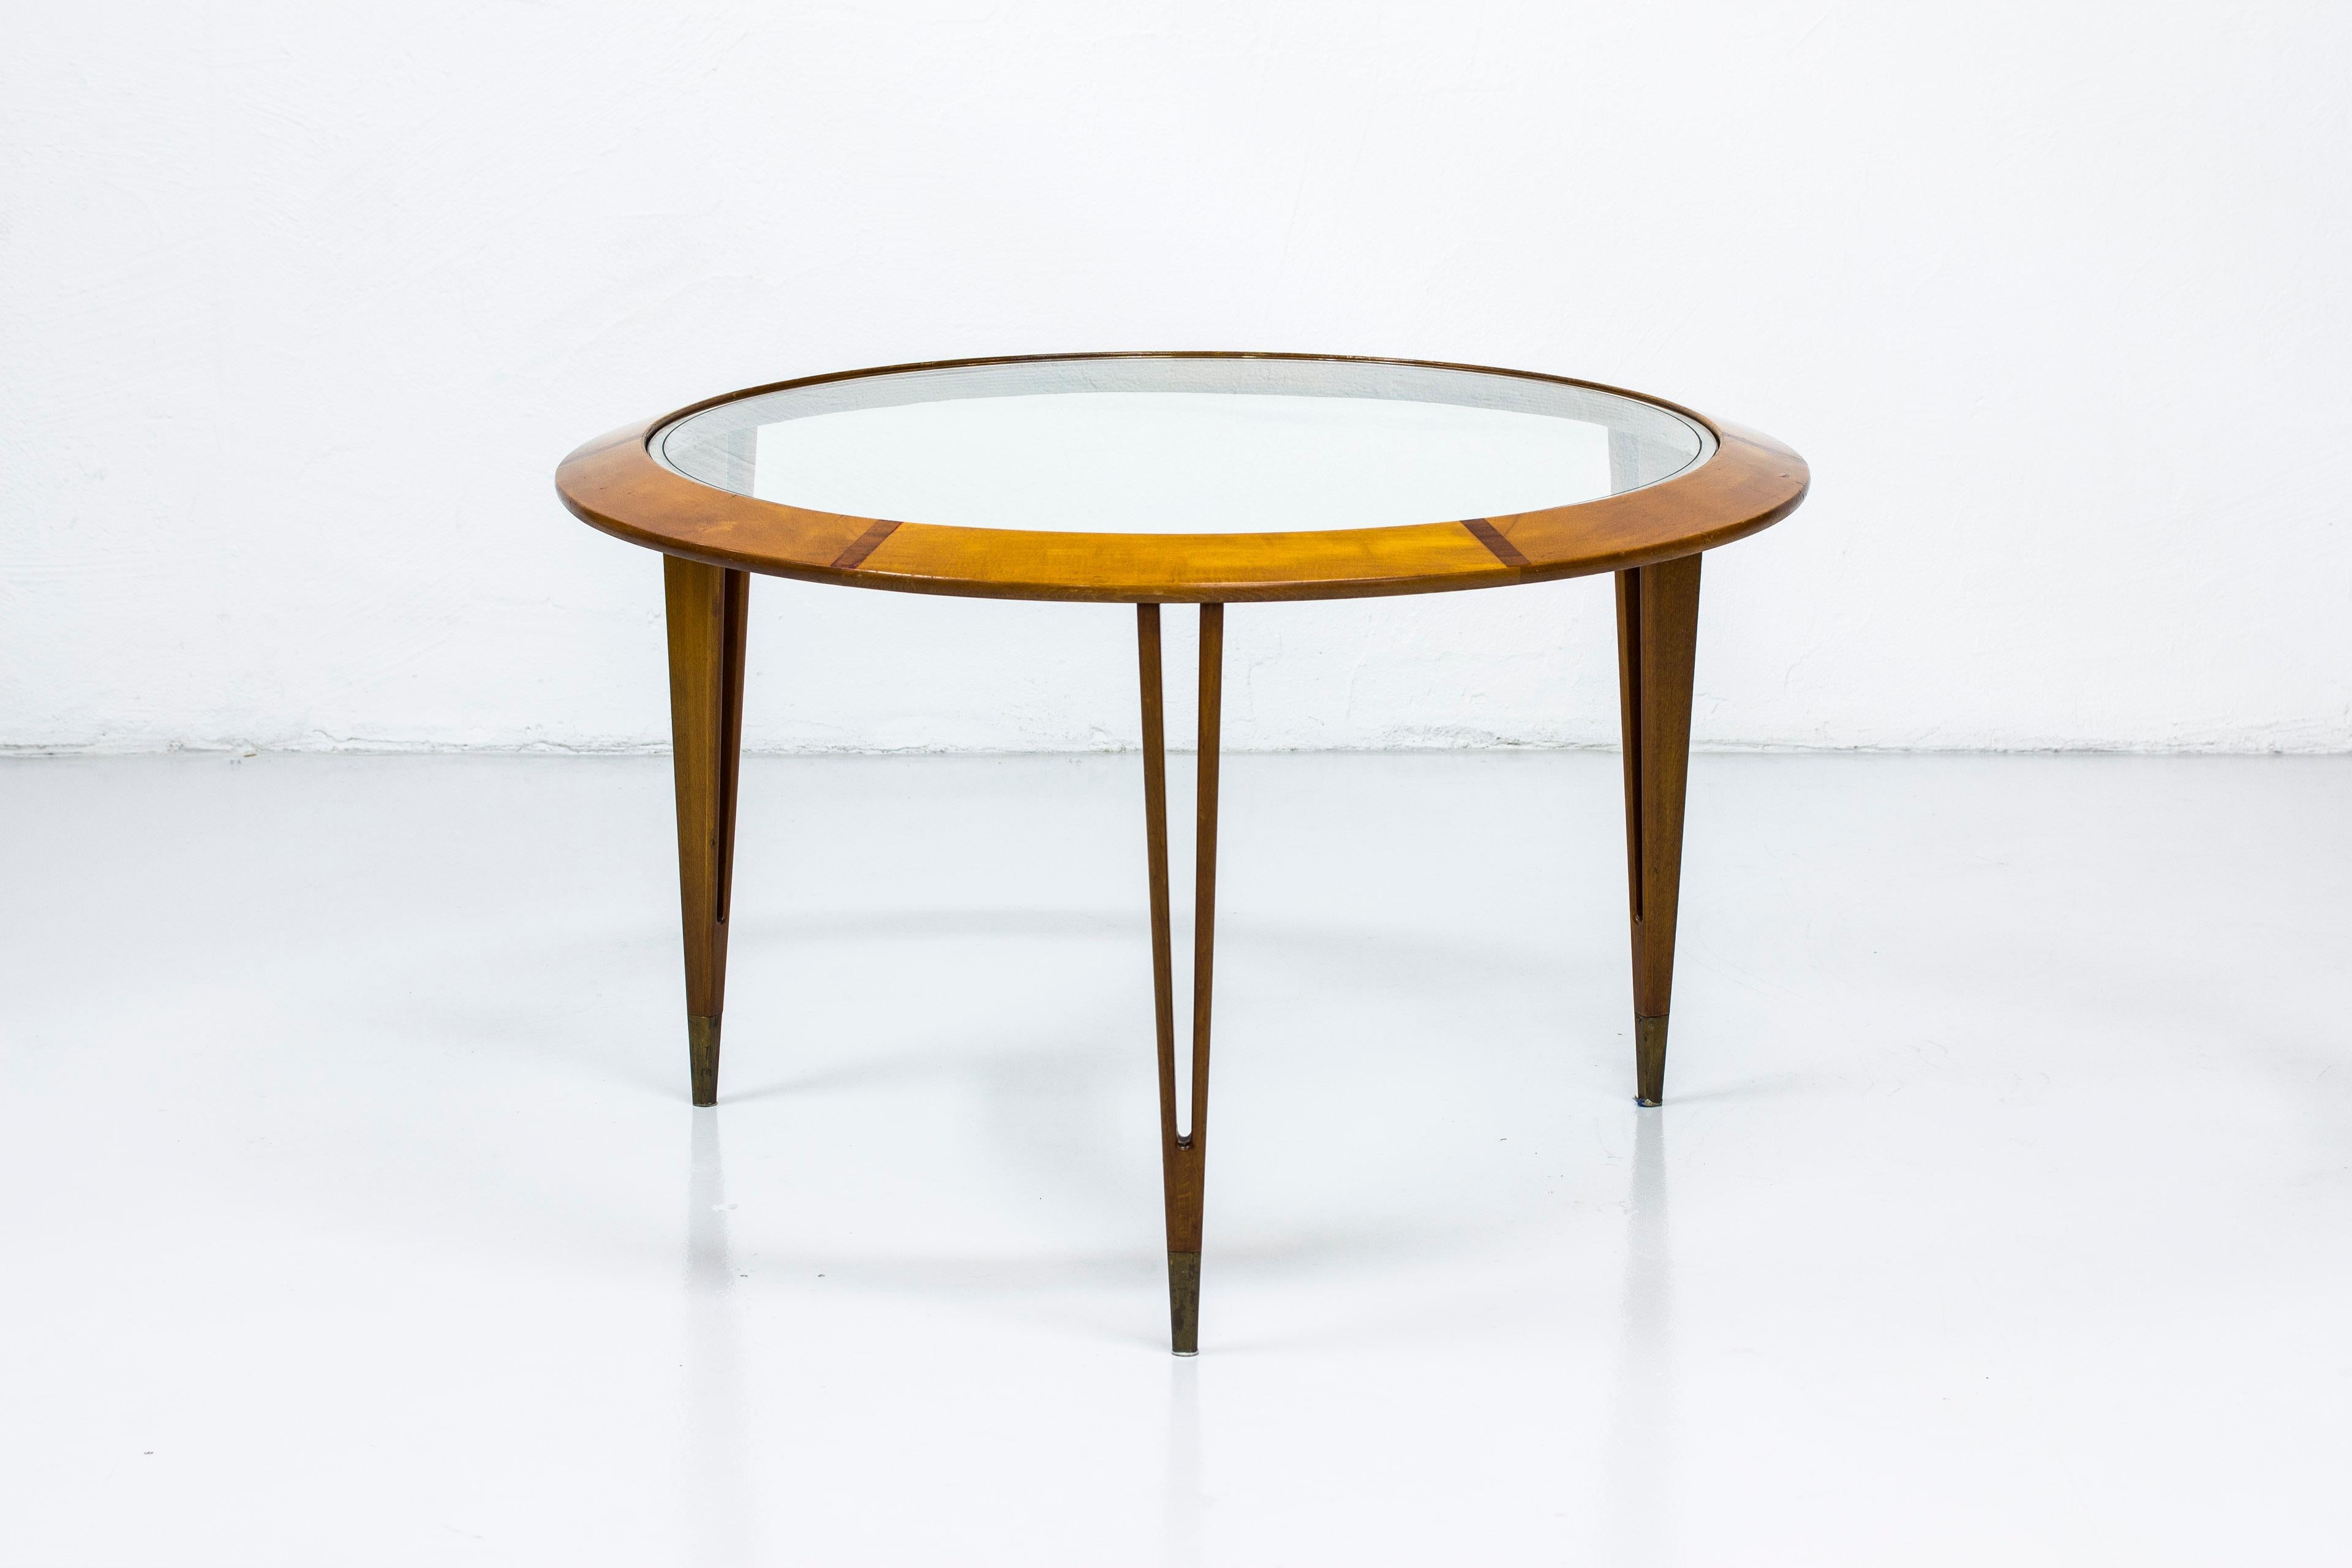 Round coffee table designed by Bertil Fridhagen. Produced in Sweden by Bodafors during the 1940s-1950s. Made from beech wood with contrasting inlays of mahogany in the circular frame. Glass top with etched line. Tapered legs with brass feet endings.